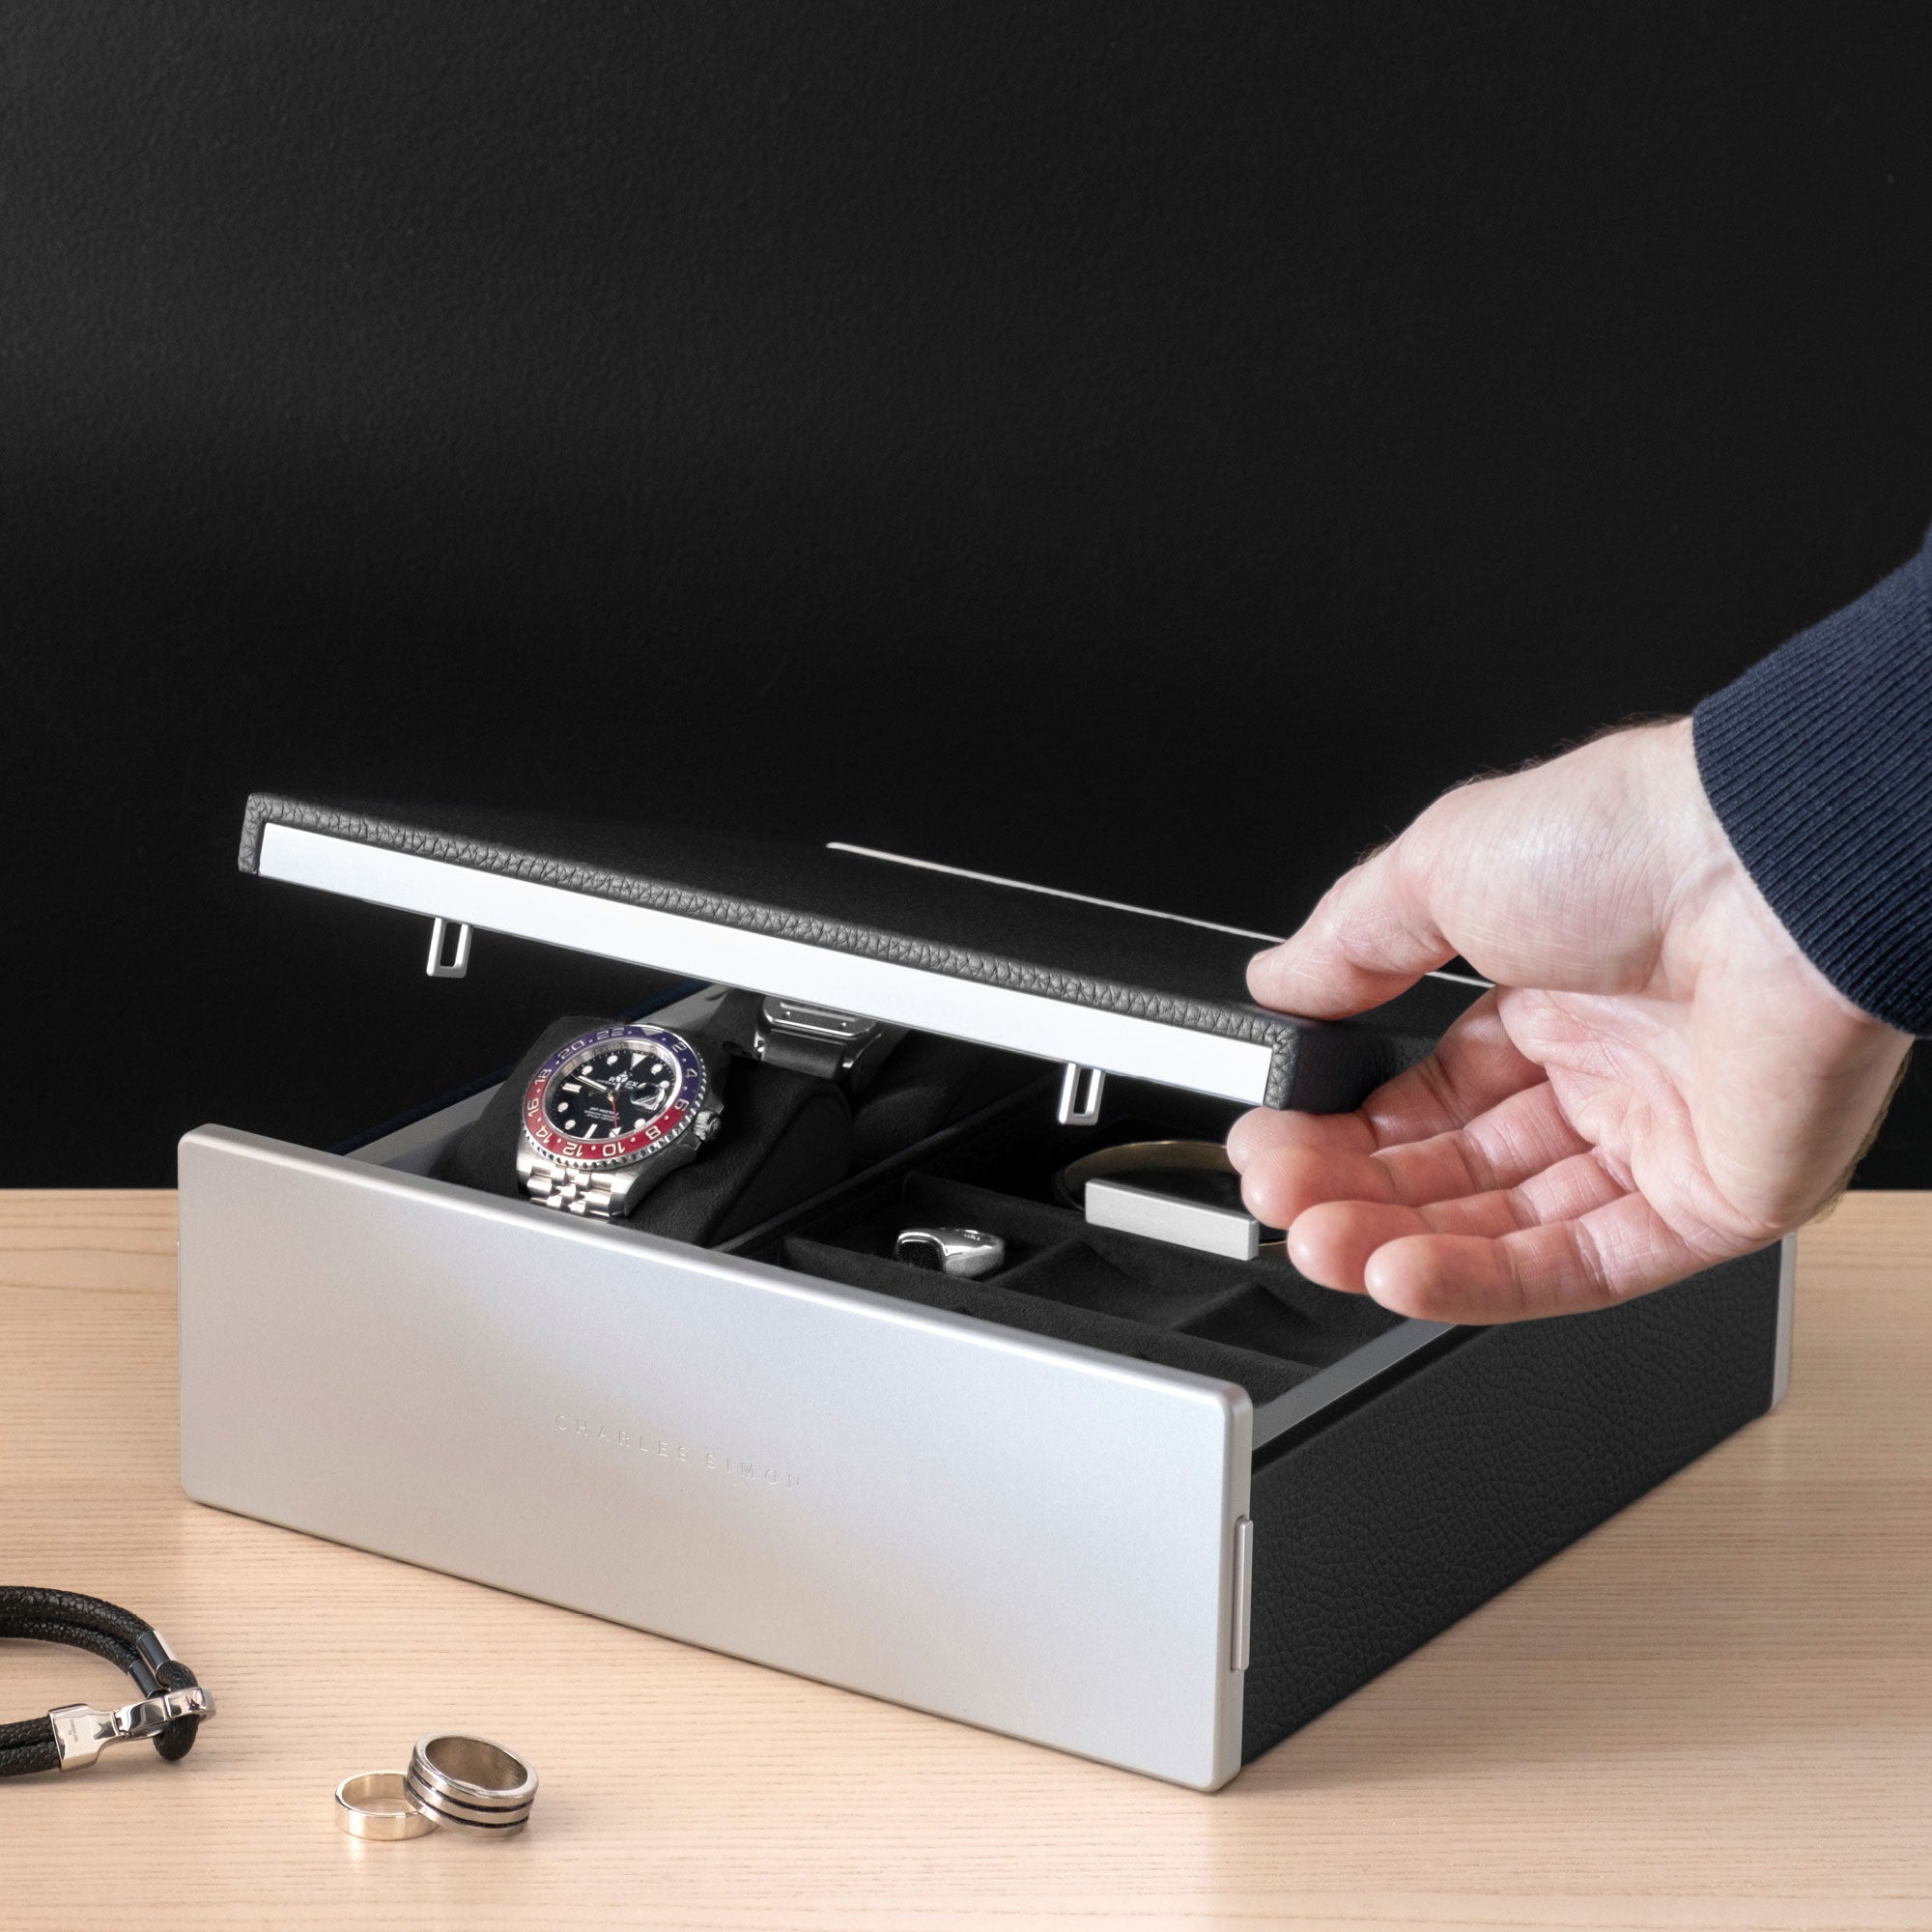 Man opening Taylor 2 Watch box holding timepiece and jewelry collection. The luxury watch box is displayed in a modern home.